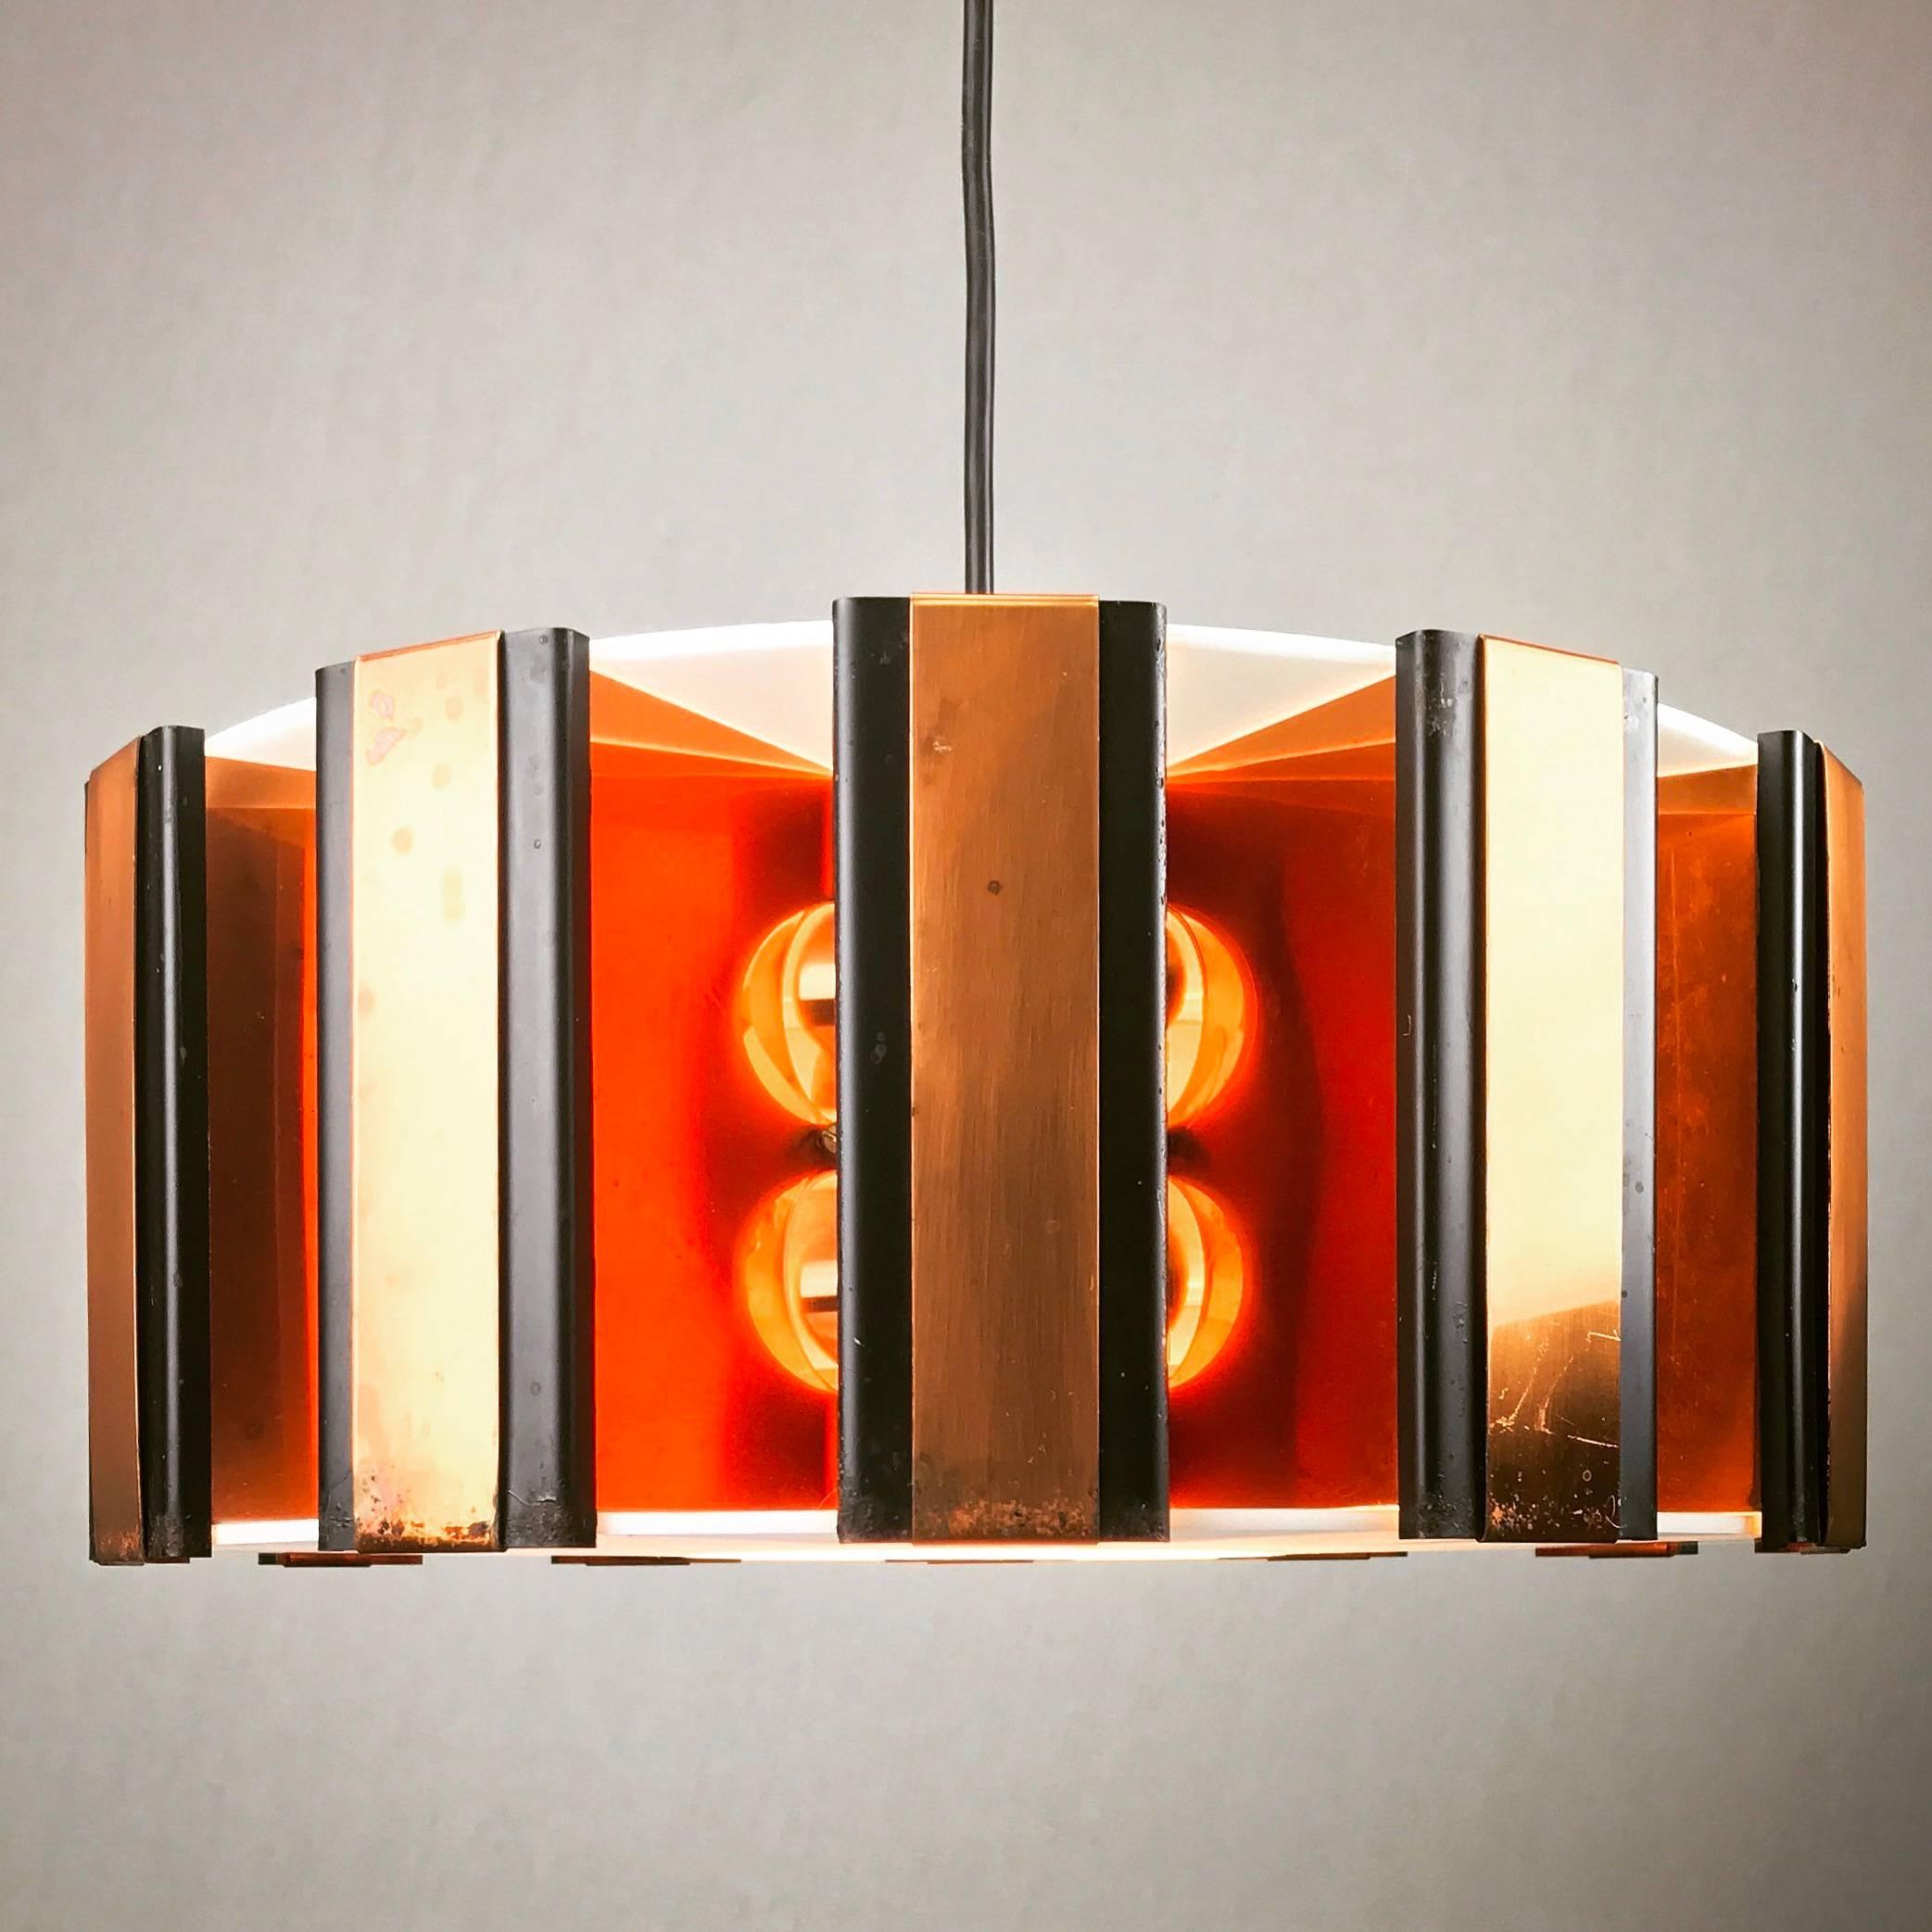 Stunning piece of design by Werner Schou for Coronell Electro mid-1960s.

Please look closely at the pictures and you will see the complexity of the design, as well as the high standard of quality. Light is being distributed in all directions -